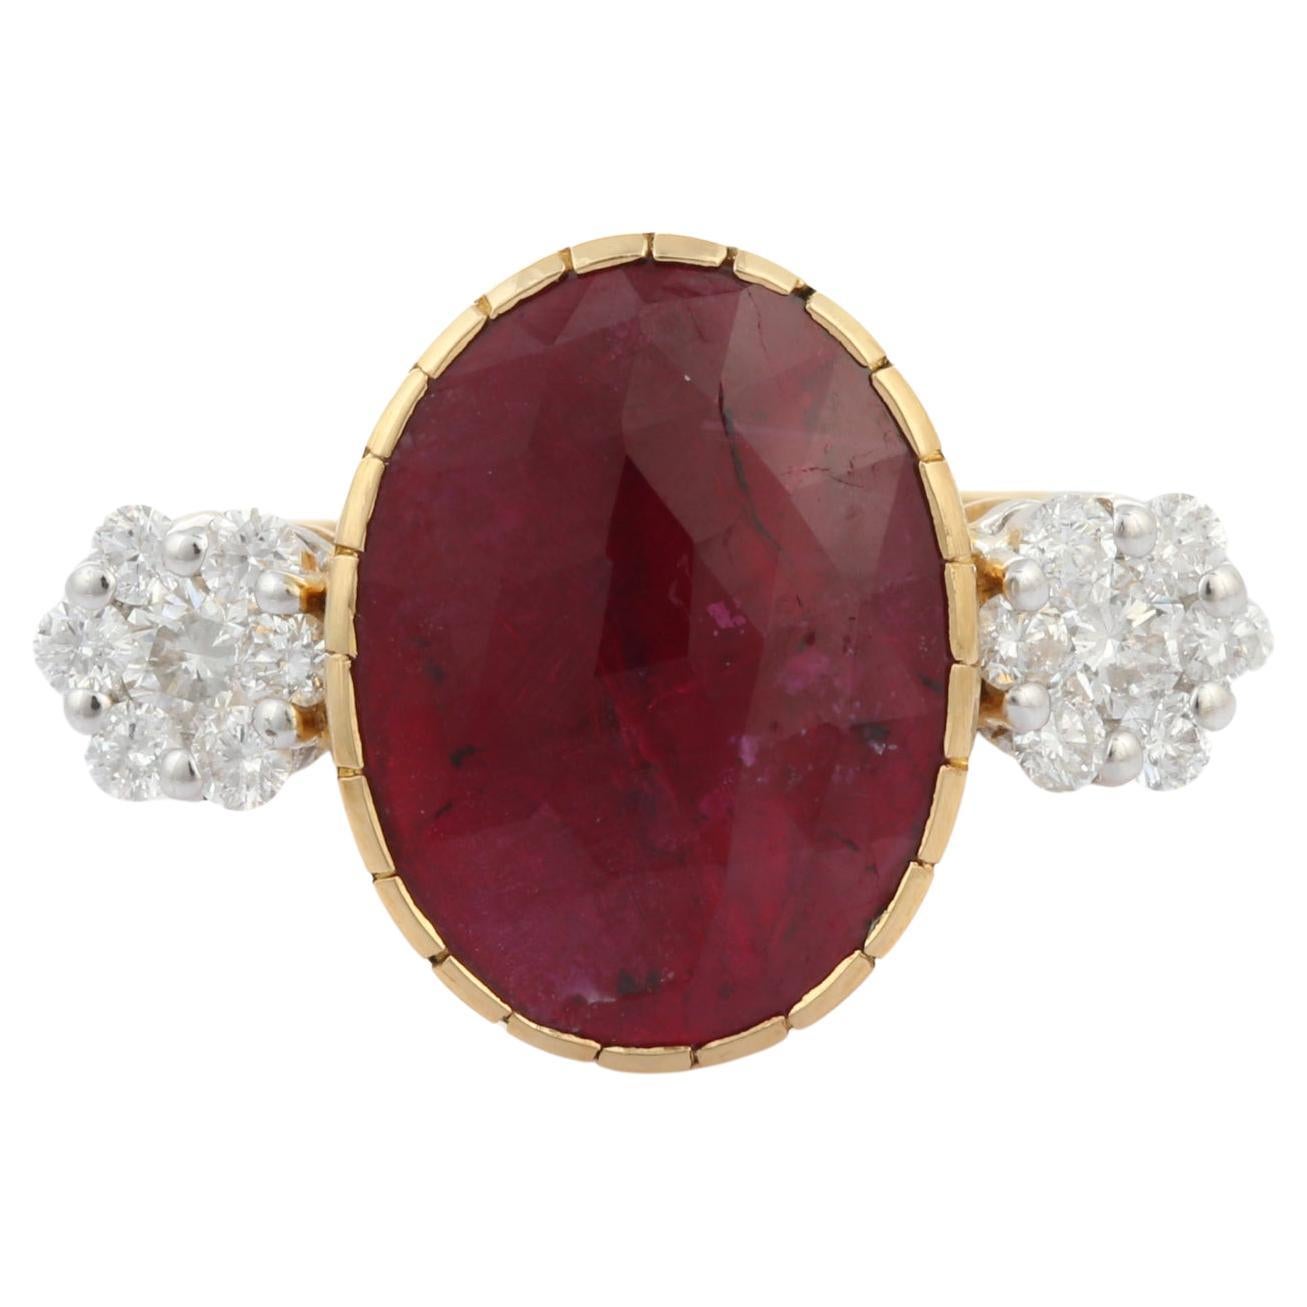 For Sale:  2.65 Carat Oval Cut Ruby Diamond Engagement Ring in 18 Karat Yellow Gold